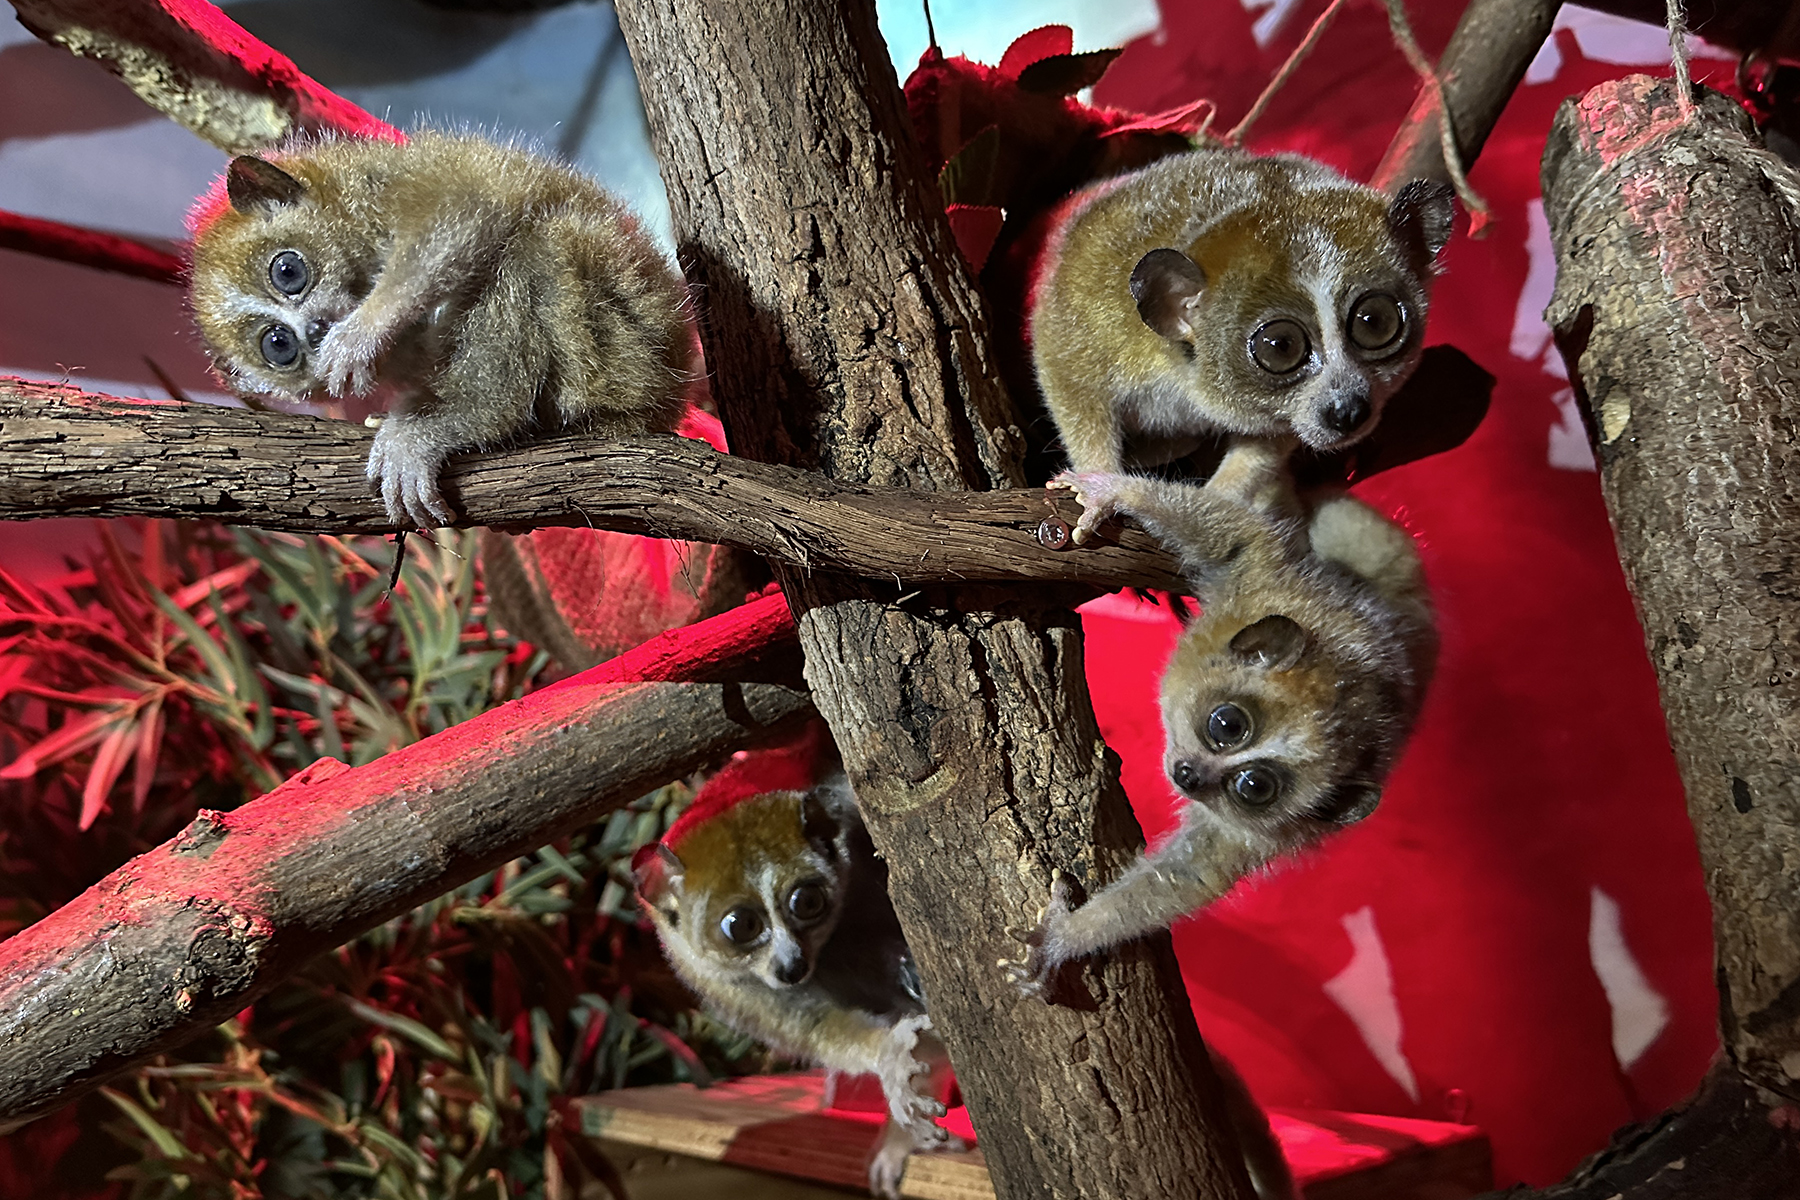 Pygmy slow loris family (Naga, Pabu and their offspring) hang out in a tree together. They gather to eat tree sap, or gum arabic.